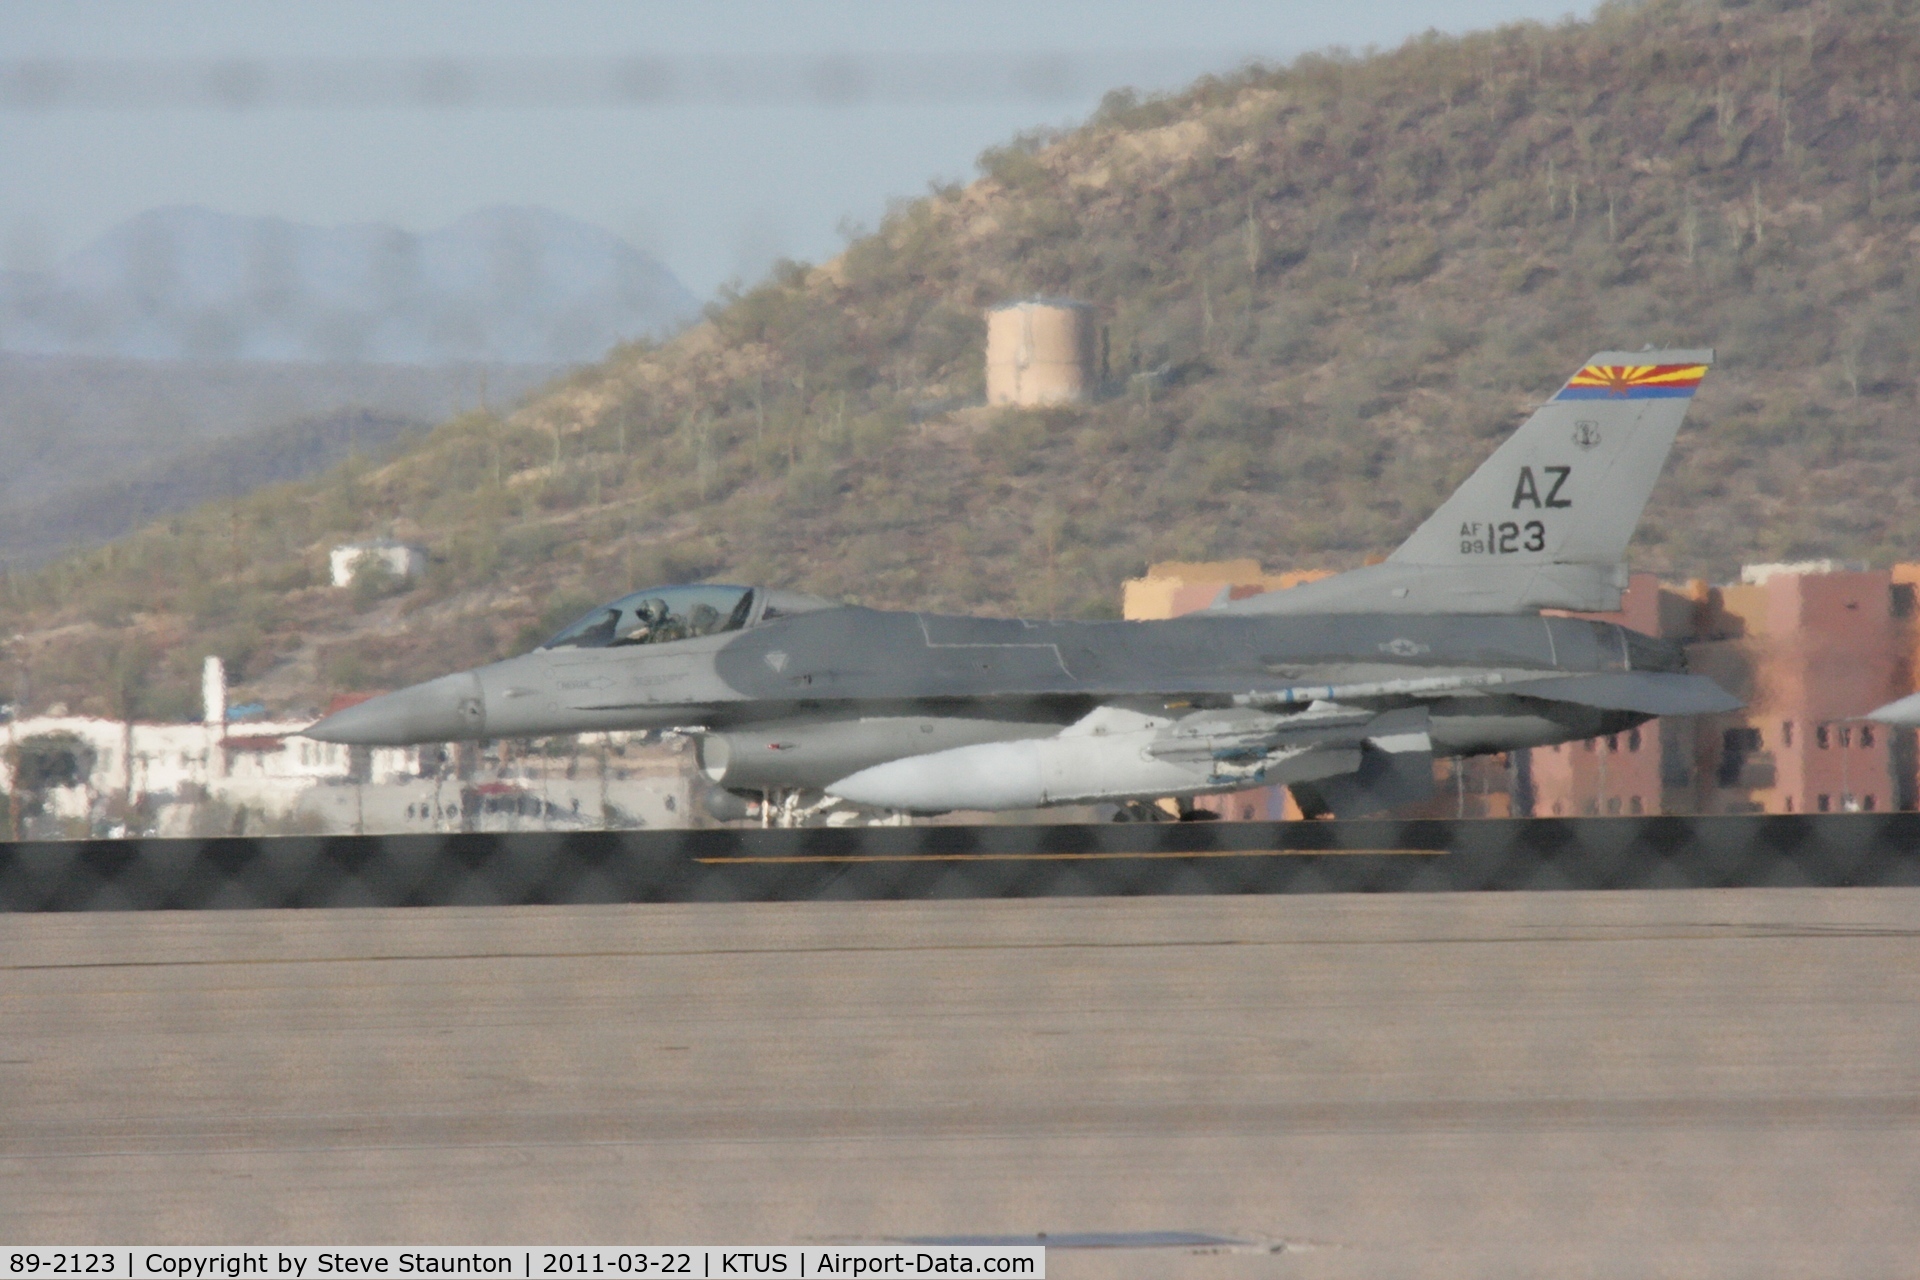 89-2123, General Dynamics F-16C C/N 1C-276, Taken at Tucson International Airport, in March 2011 whilst on an Aeroprint Aviation tour